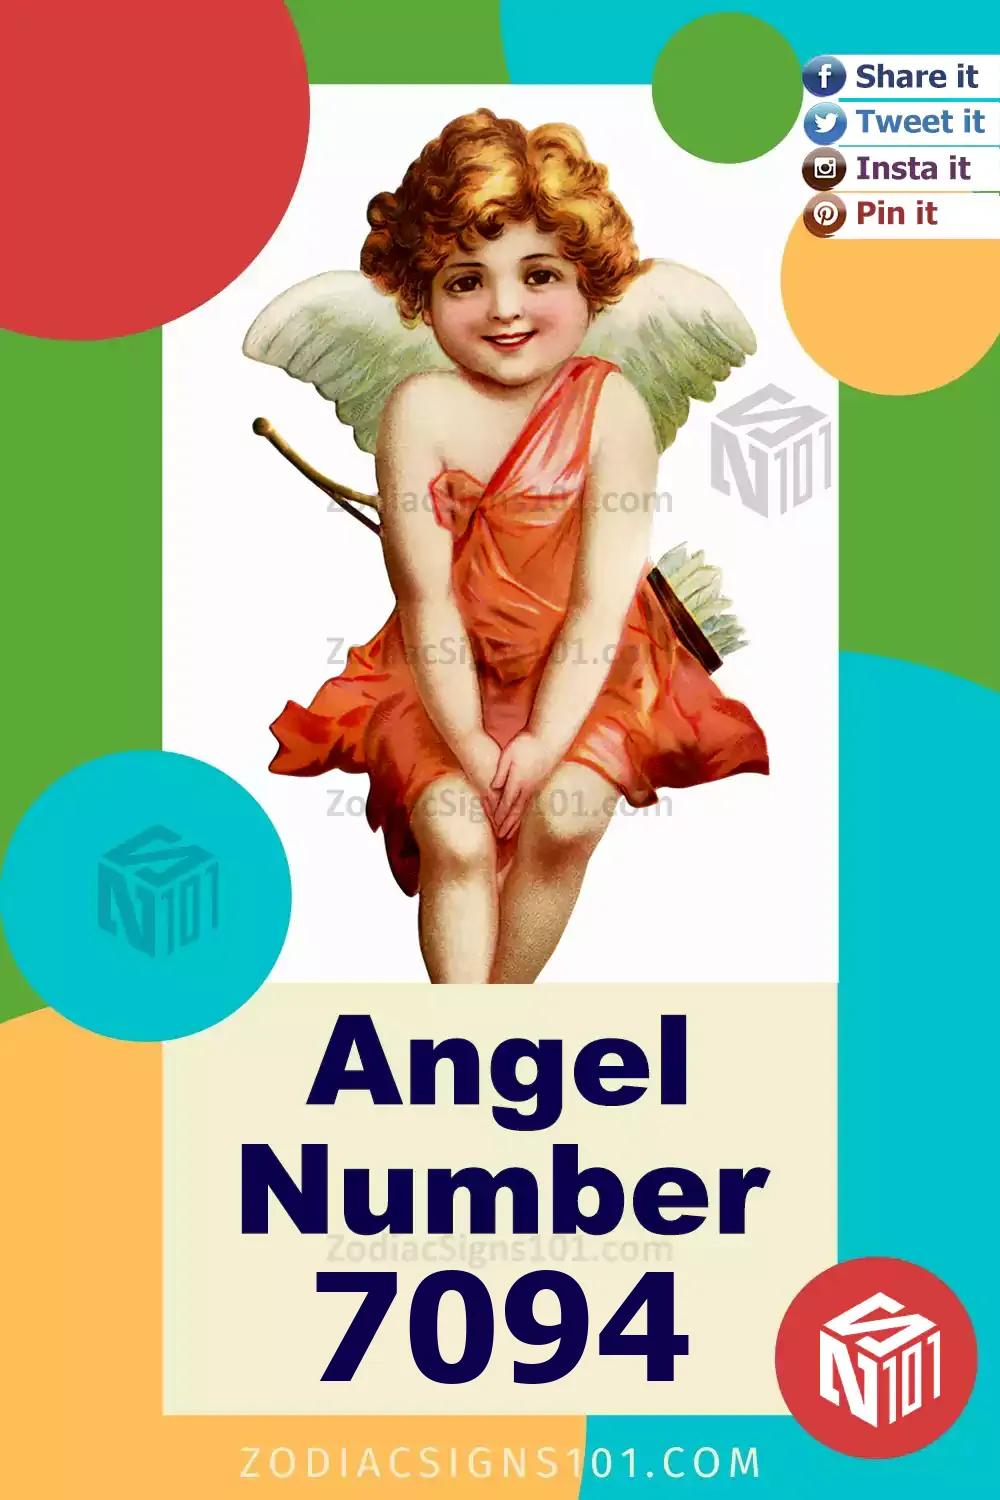 7094 Angel Number Meaning